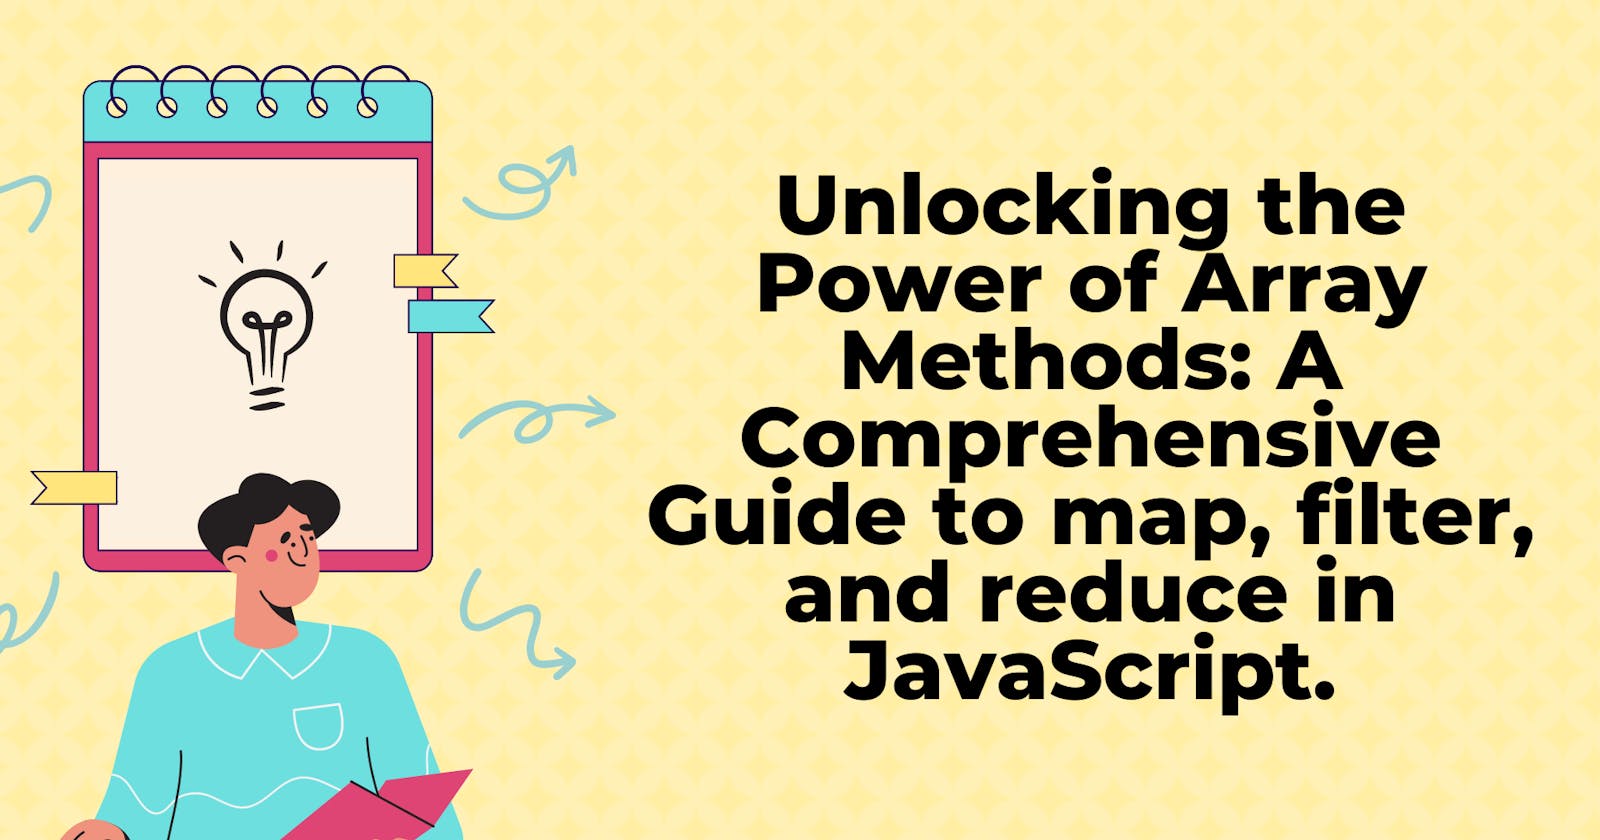 Unlocking the Power of Array Methods: A Comprehensive Guide to map, filter, and reduce in JavaScript.